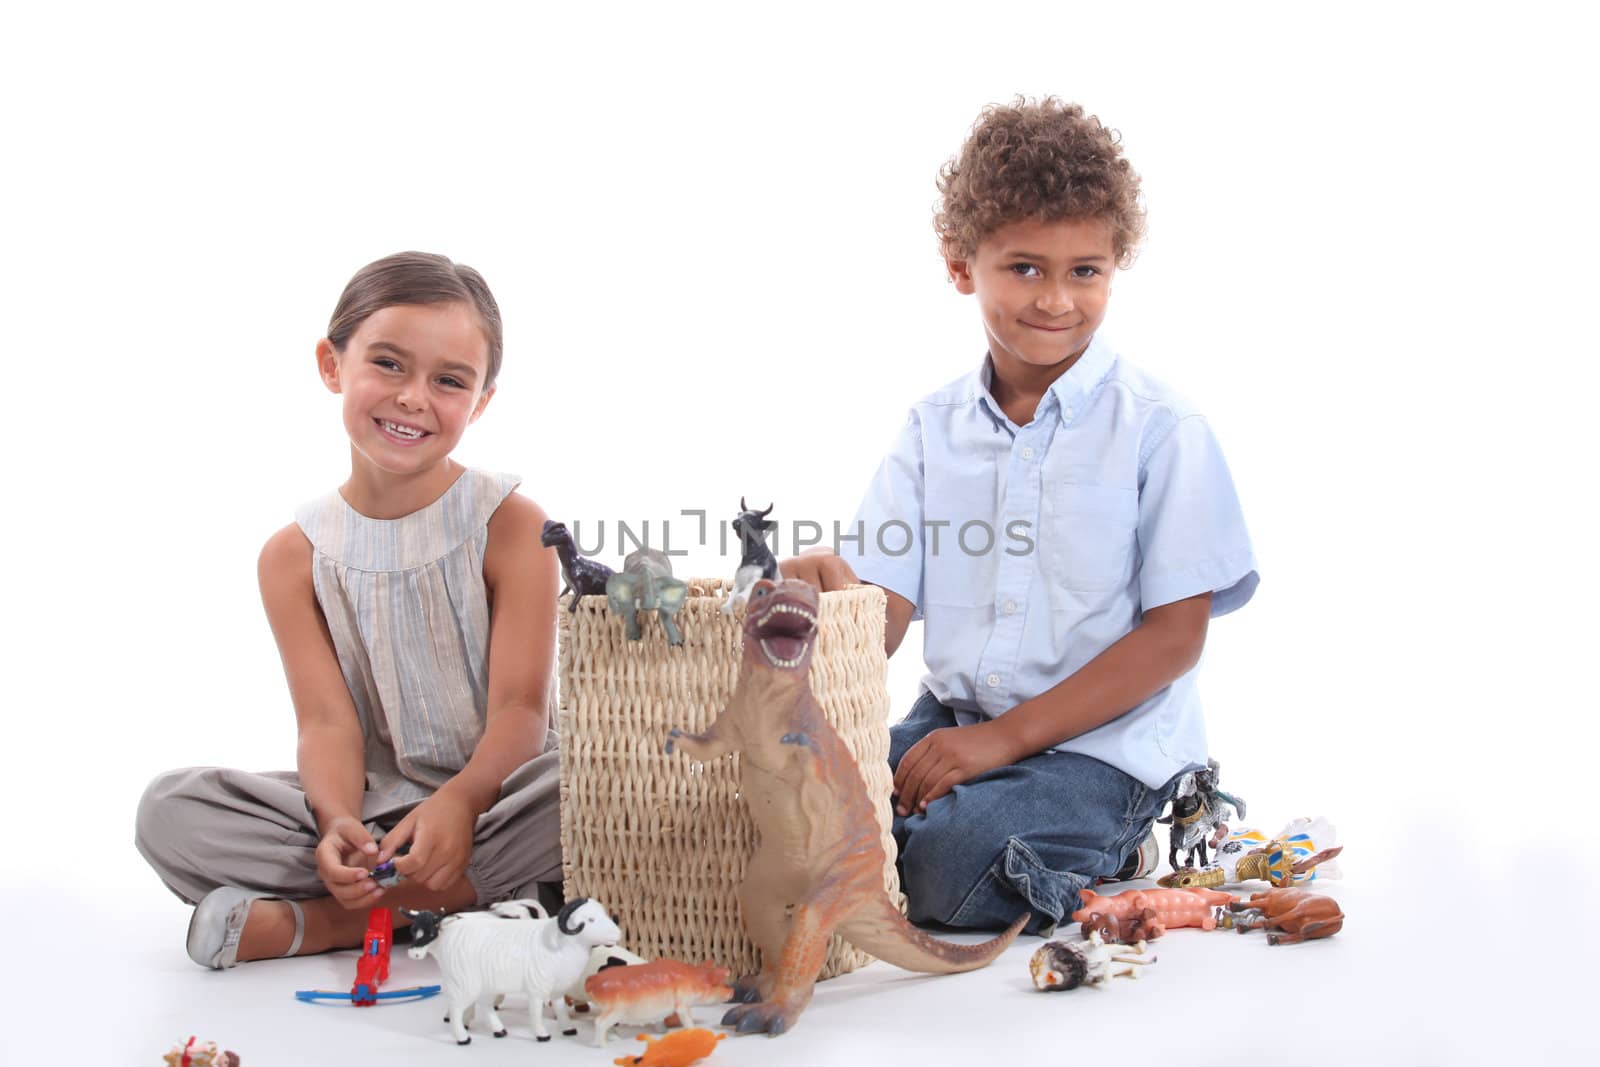 Children playing with plastic toy figurines by phovoir